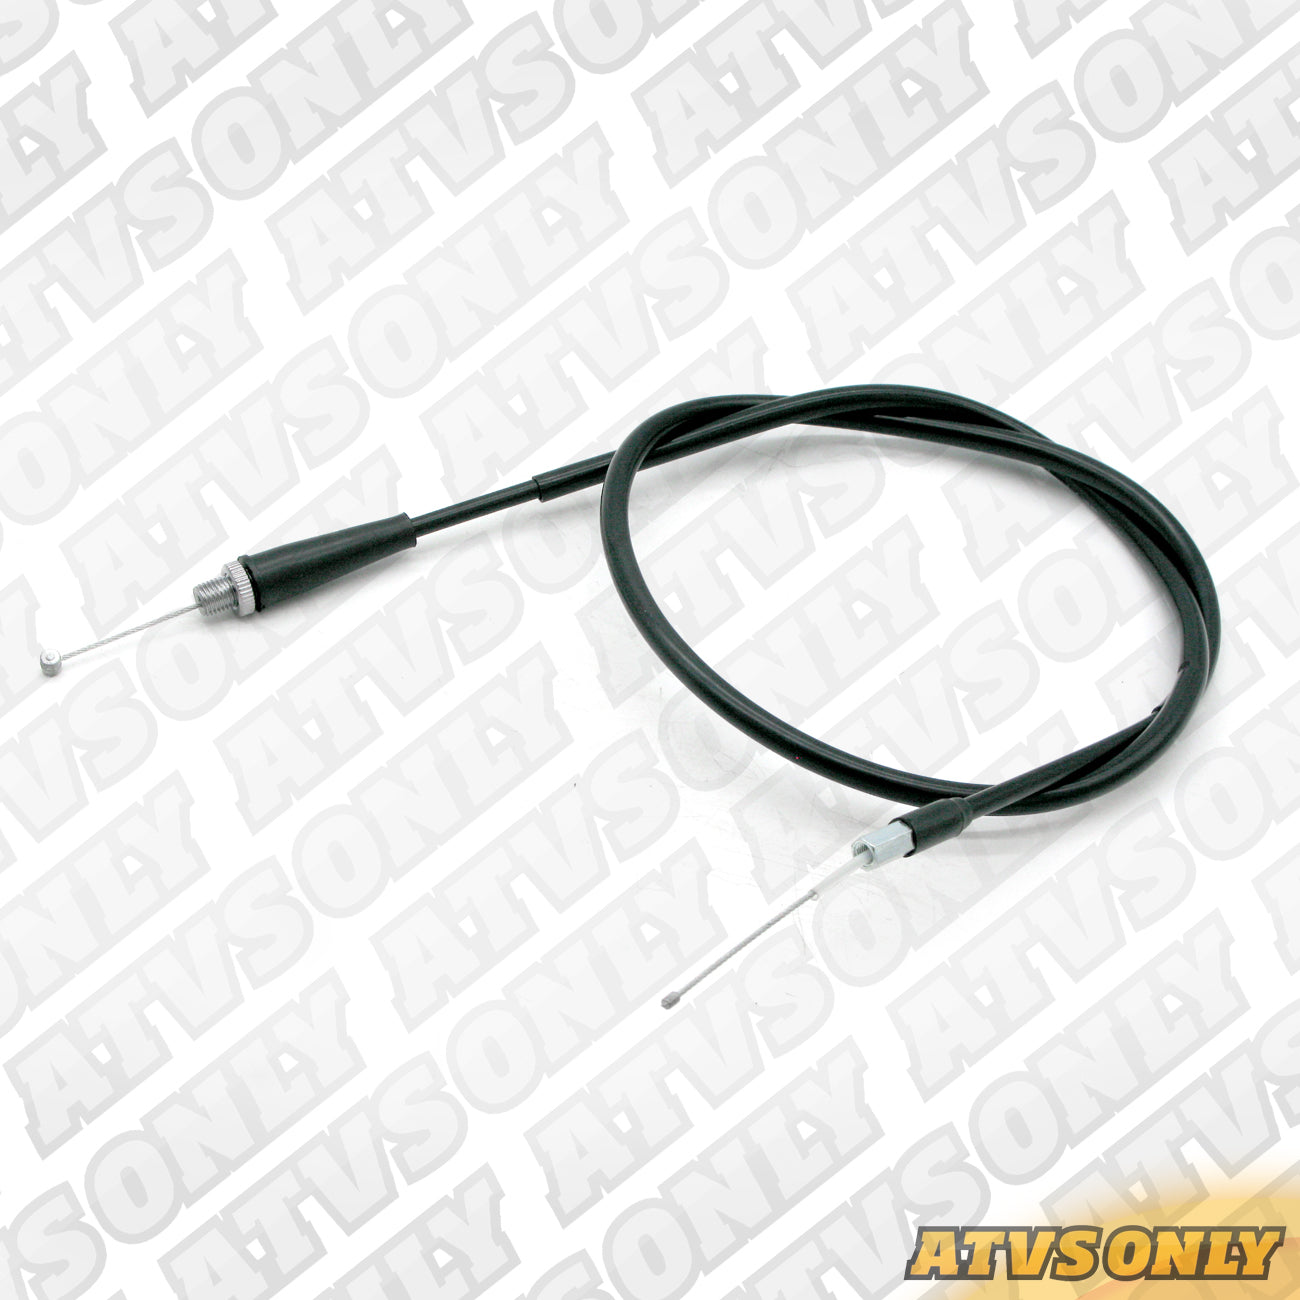 Cables – Replacement CR Pro Throttle Cable for Yamaha YFZ450R ’09-